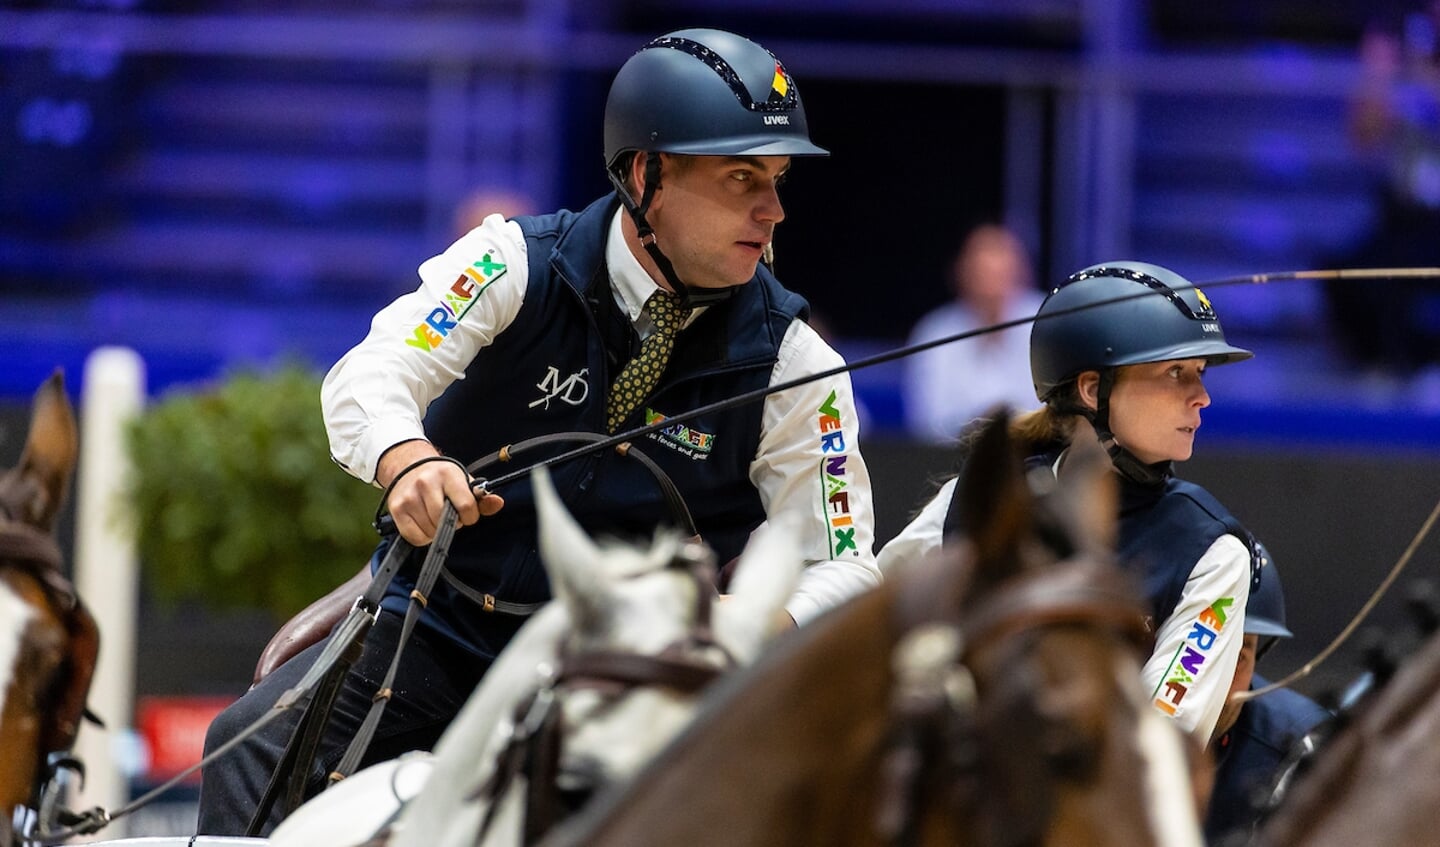 Dries Degrieck (BEL) with on the carriage Anne Boterberg and Frederic de Bruyne
Horses 2A Hunter, 2B Incitato XV-30, 2C Kane B, 2D Leon
FEI Driving World Cup Lyon 2022
© DigiShots